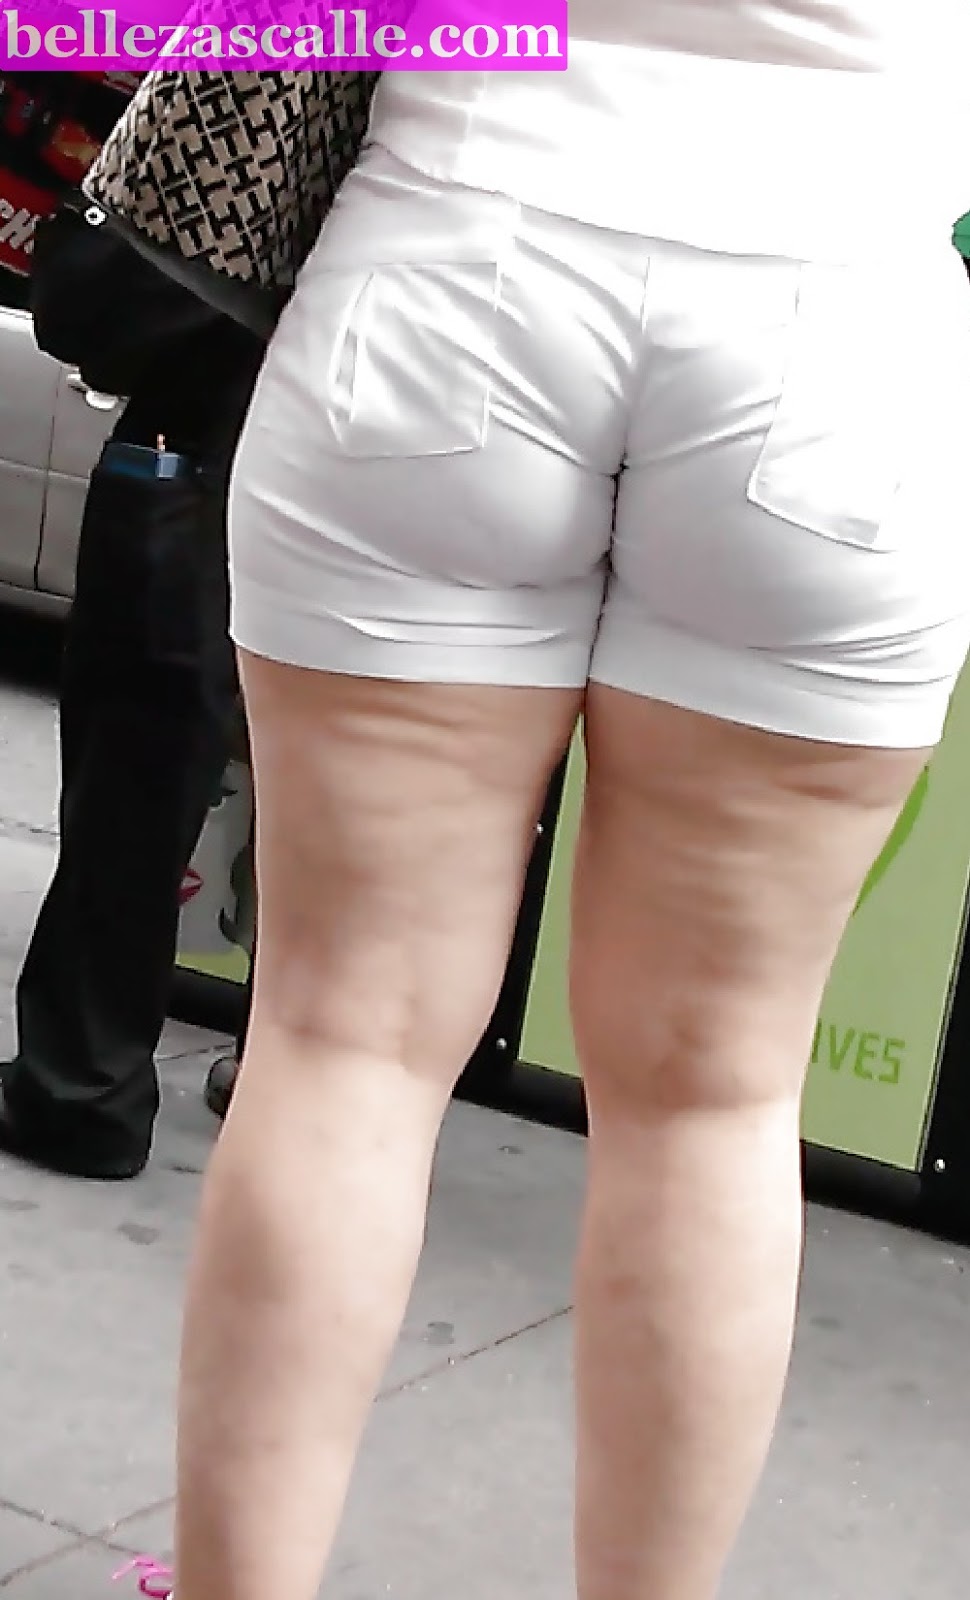 Candid Pawg Walk Plump Booty